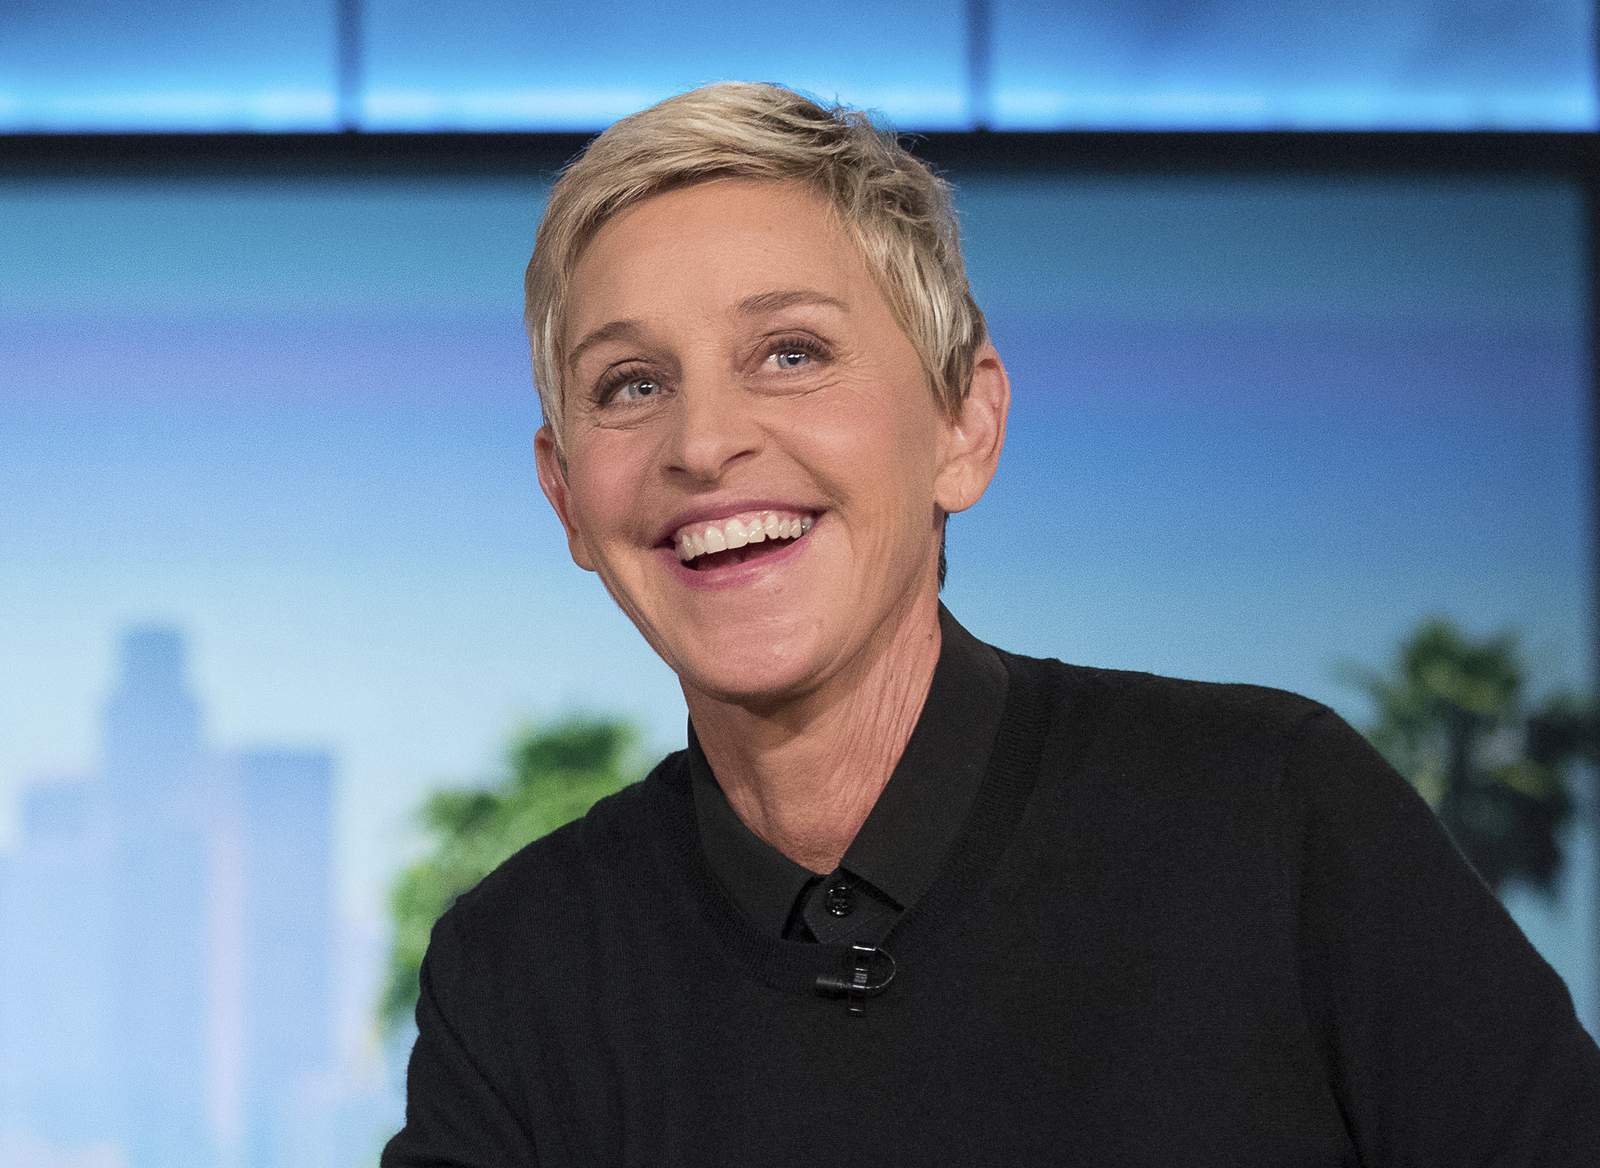 DeGeneres apologizes to shows staff amid workplace inquiry